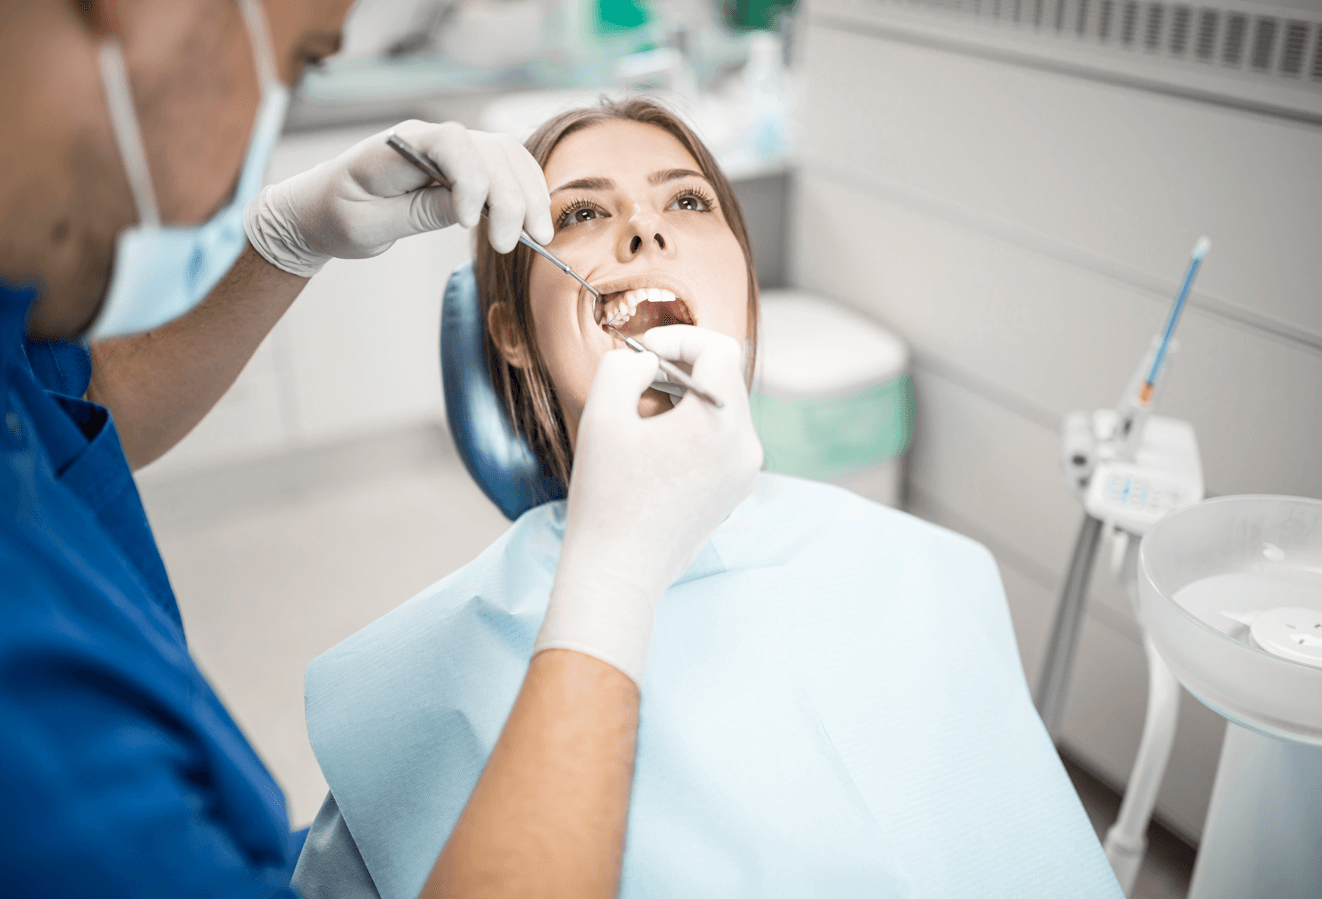 Why Choose Us For Your Root Canal Treatment